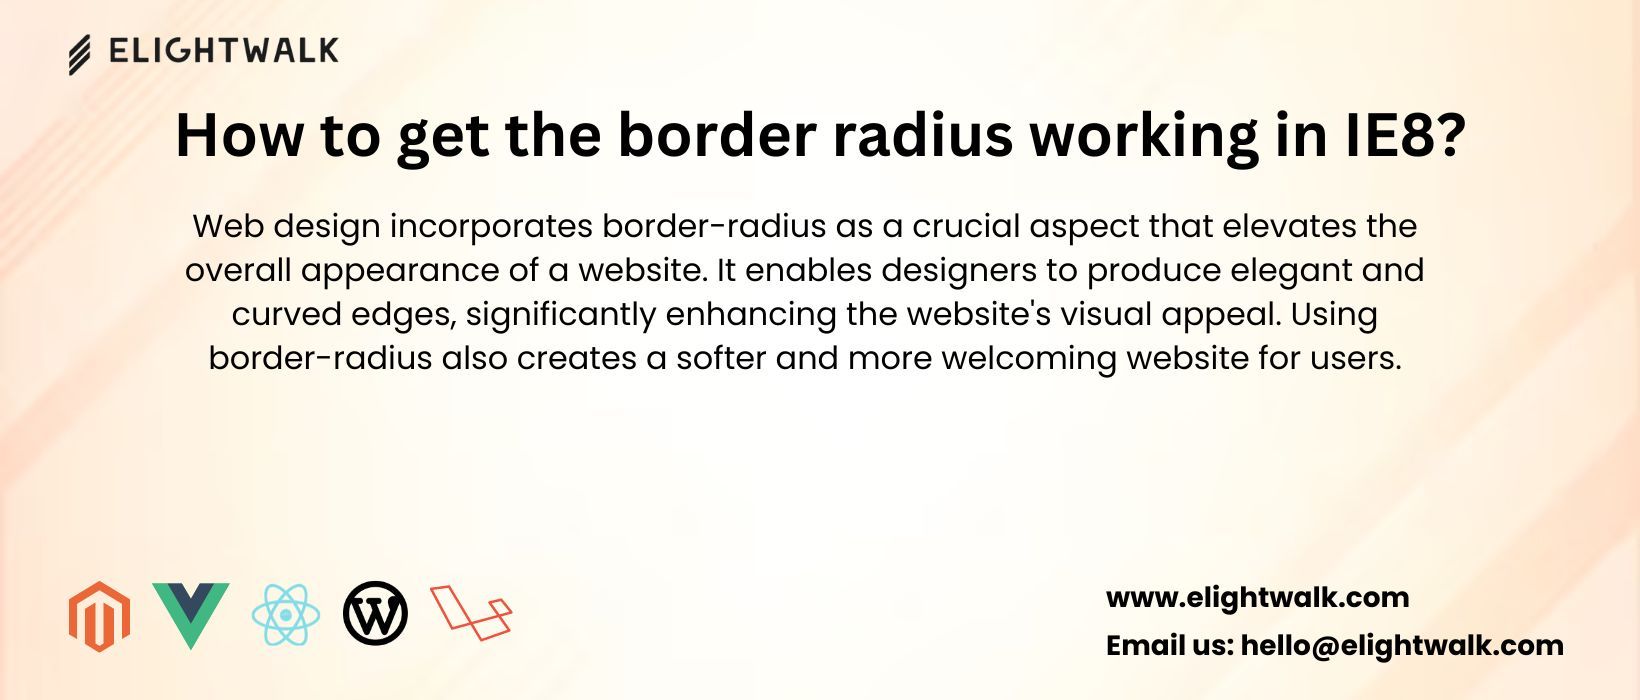 How to get the border radius working in IE8?